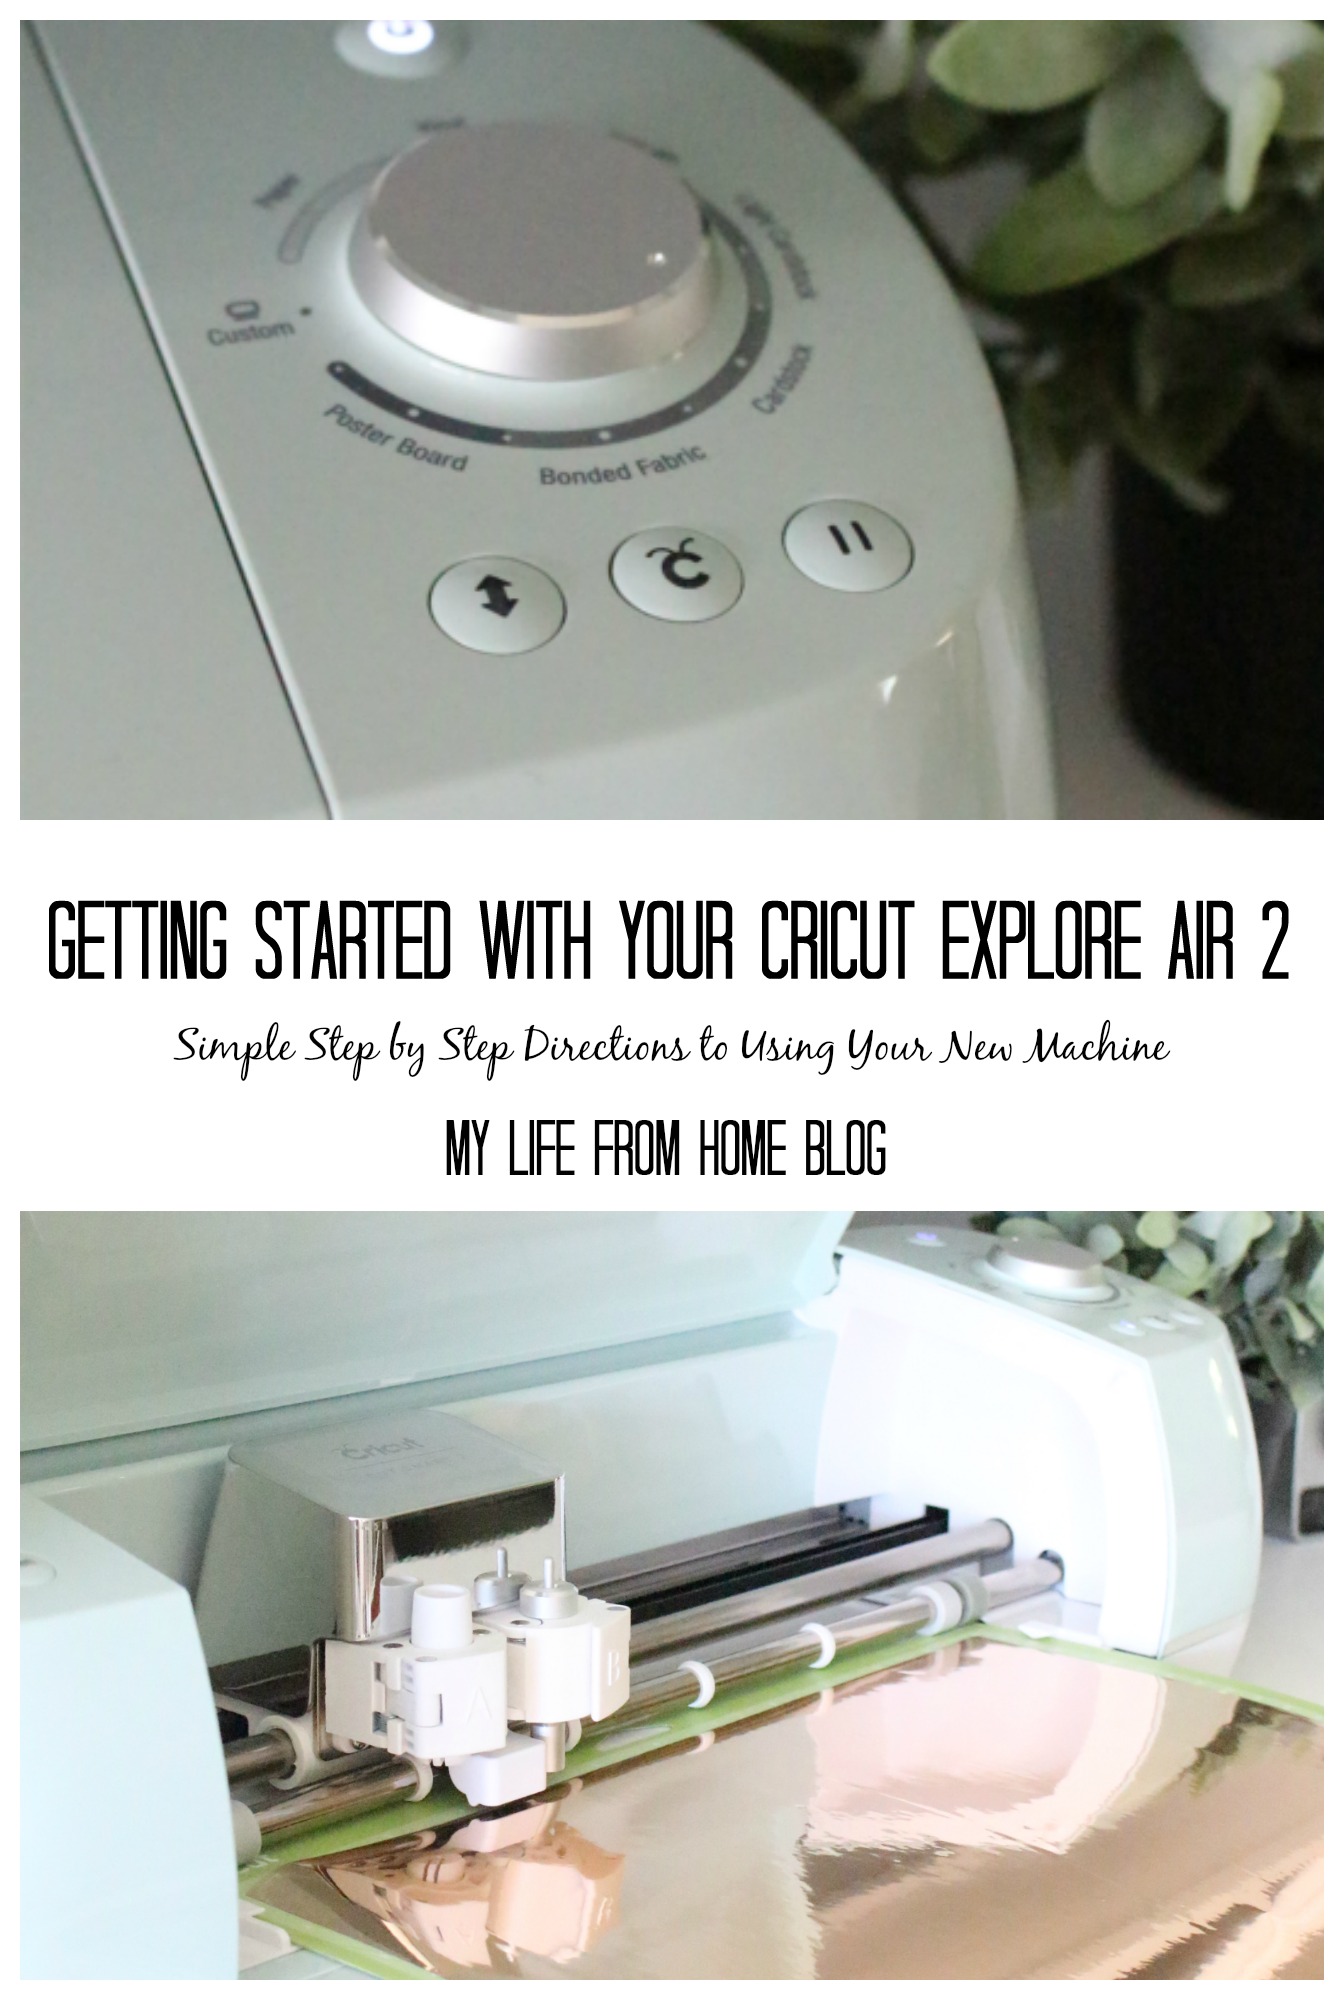 Cricut Explore Air 2- getting started- Cricut- die cut machine- cutting machine- crafting- tools- how to- directions